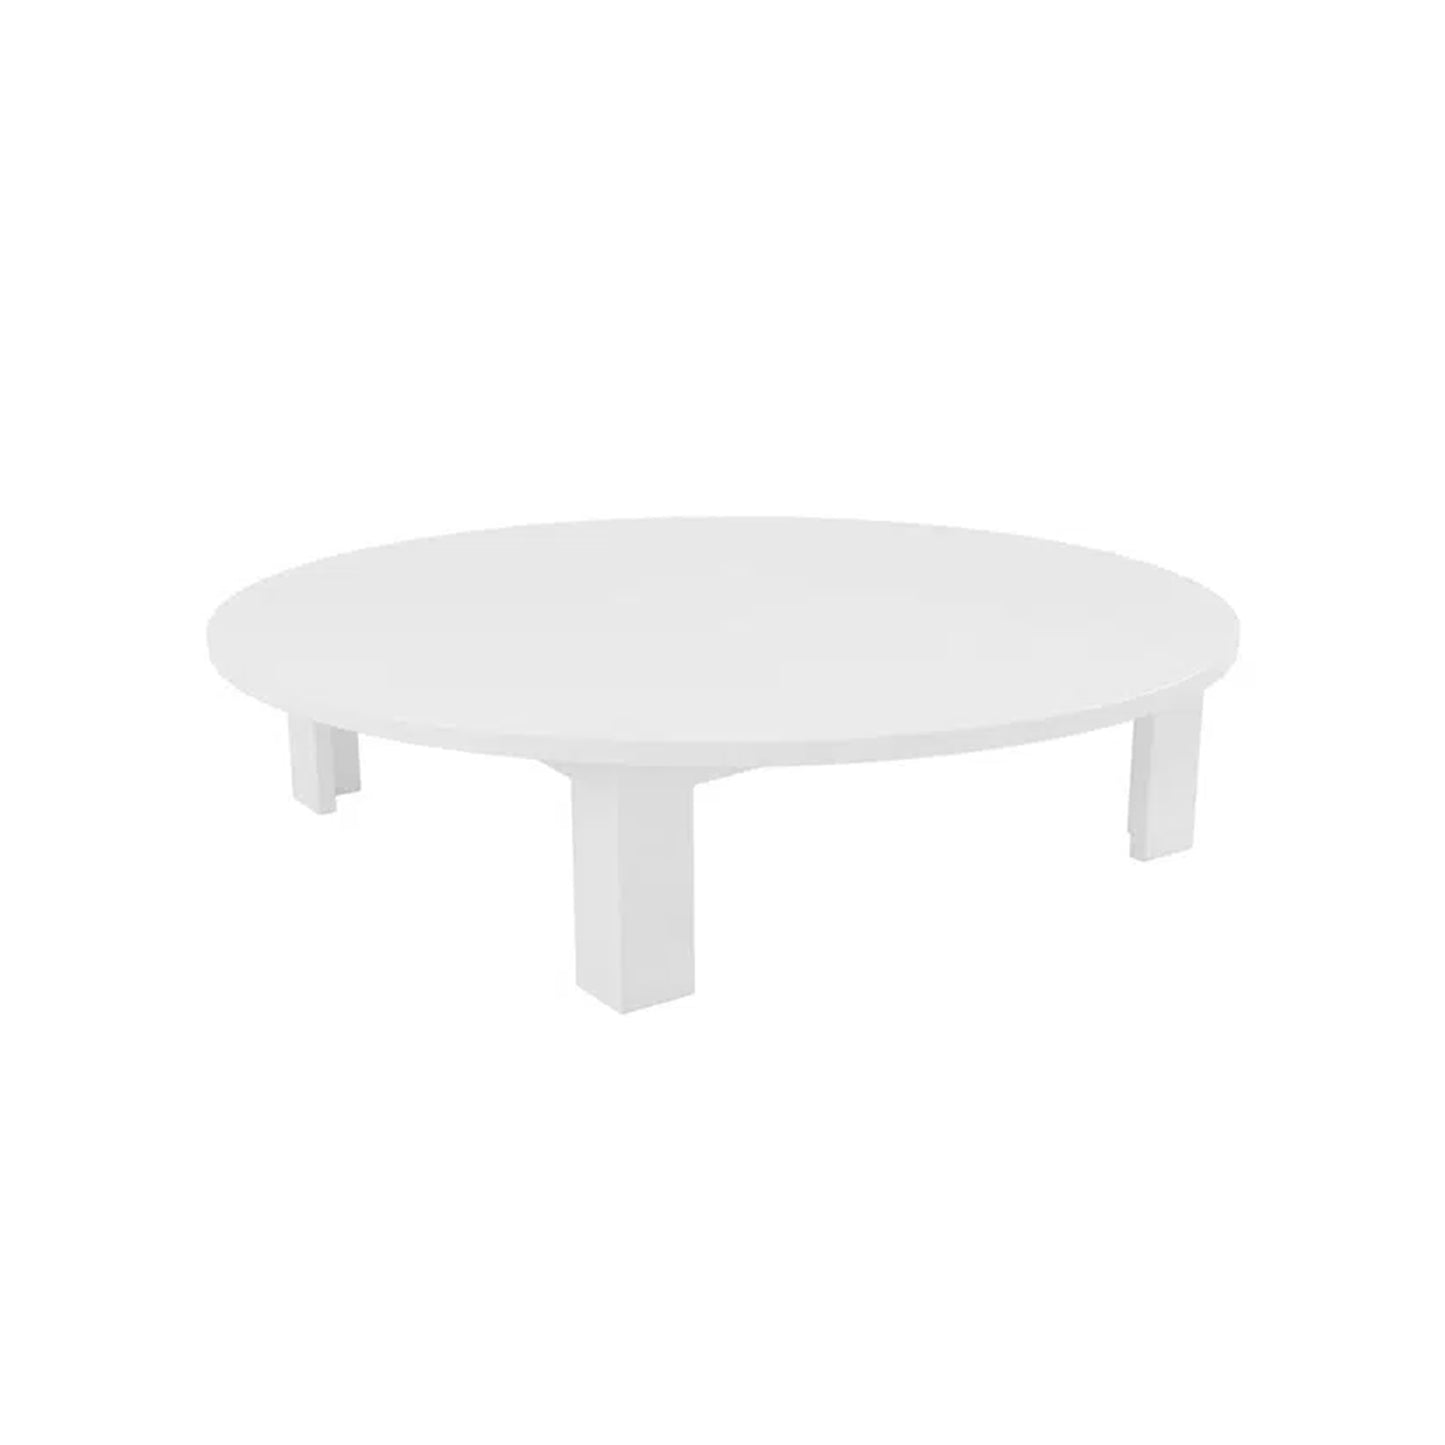 Ledge Lounger Mainstay Round Coffee Table